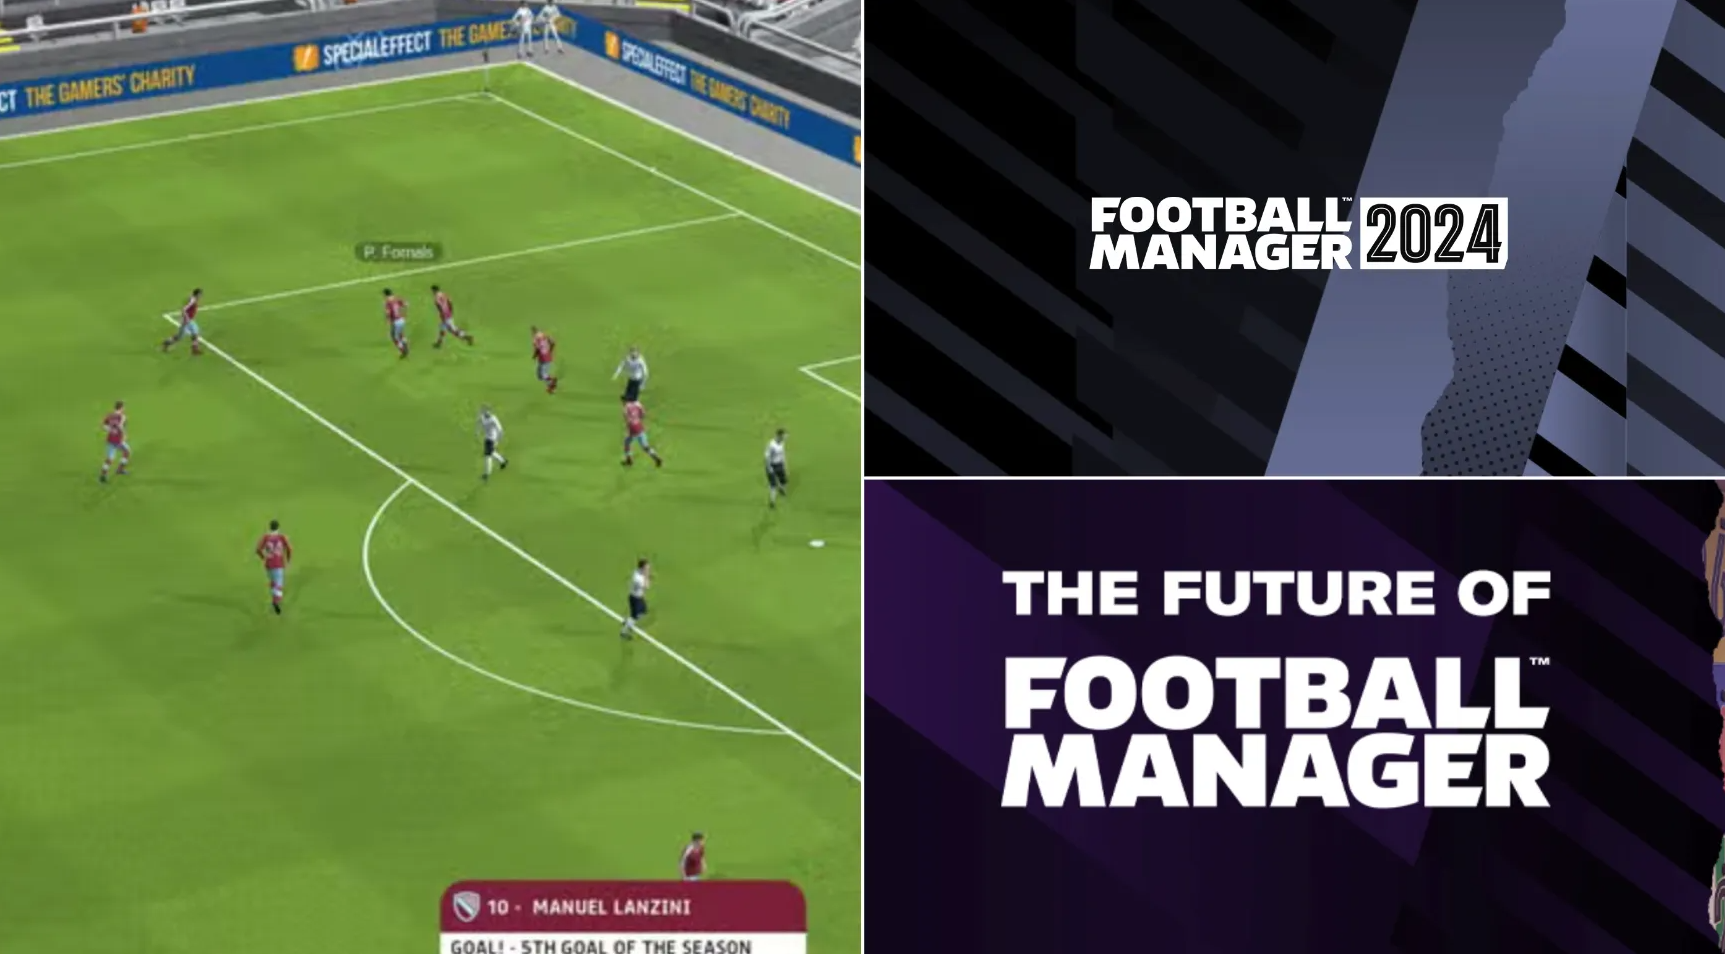 Top 8 Game-Changing Features We Want to See in Football Manager 2024, FM  Blog